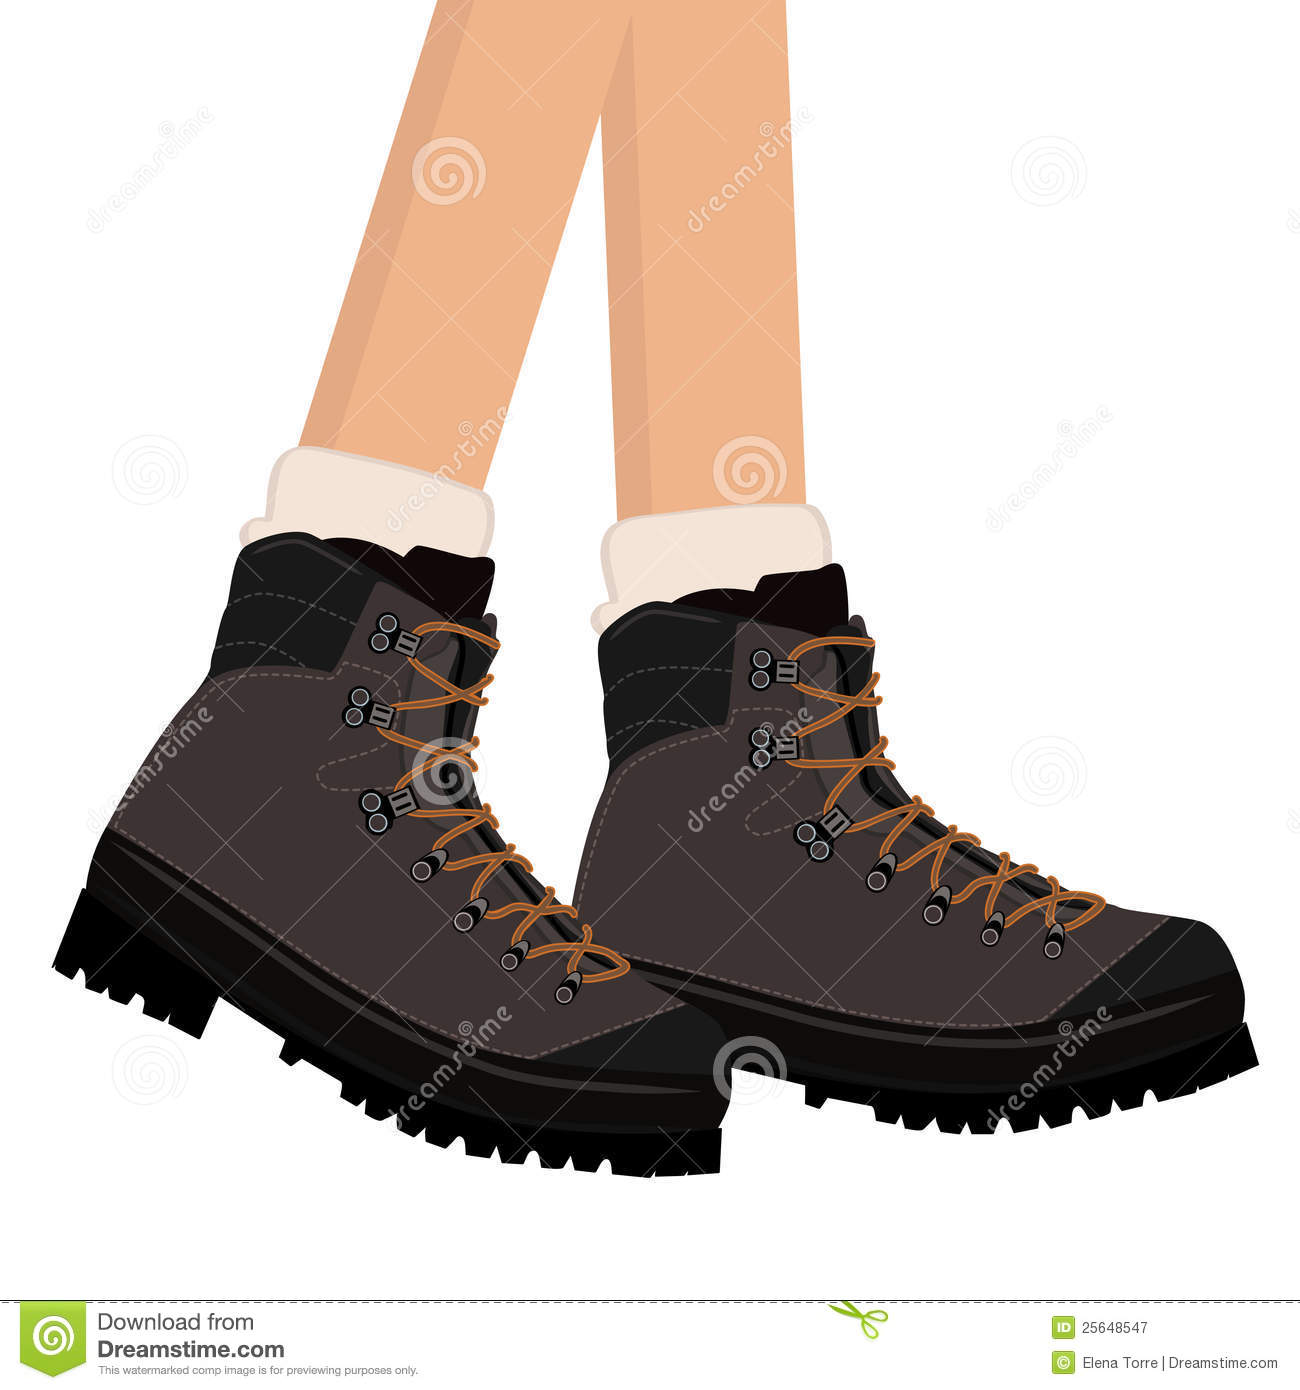 Hiking Boots Vector Royalty Free Stock Photography   Image  25648547